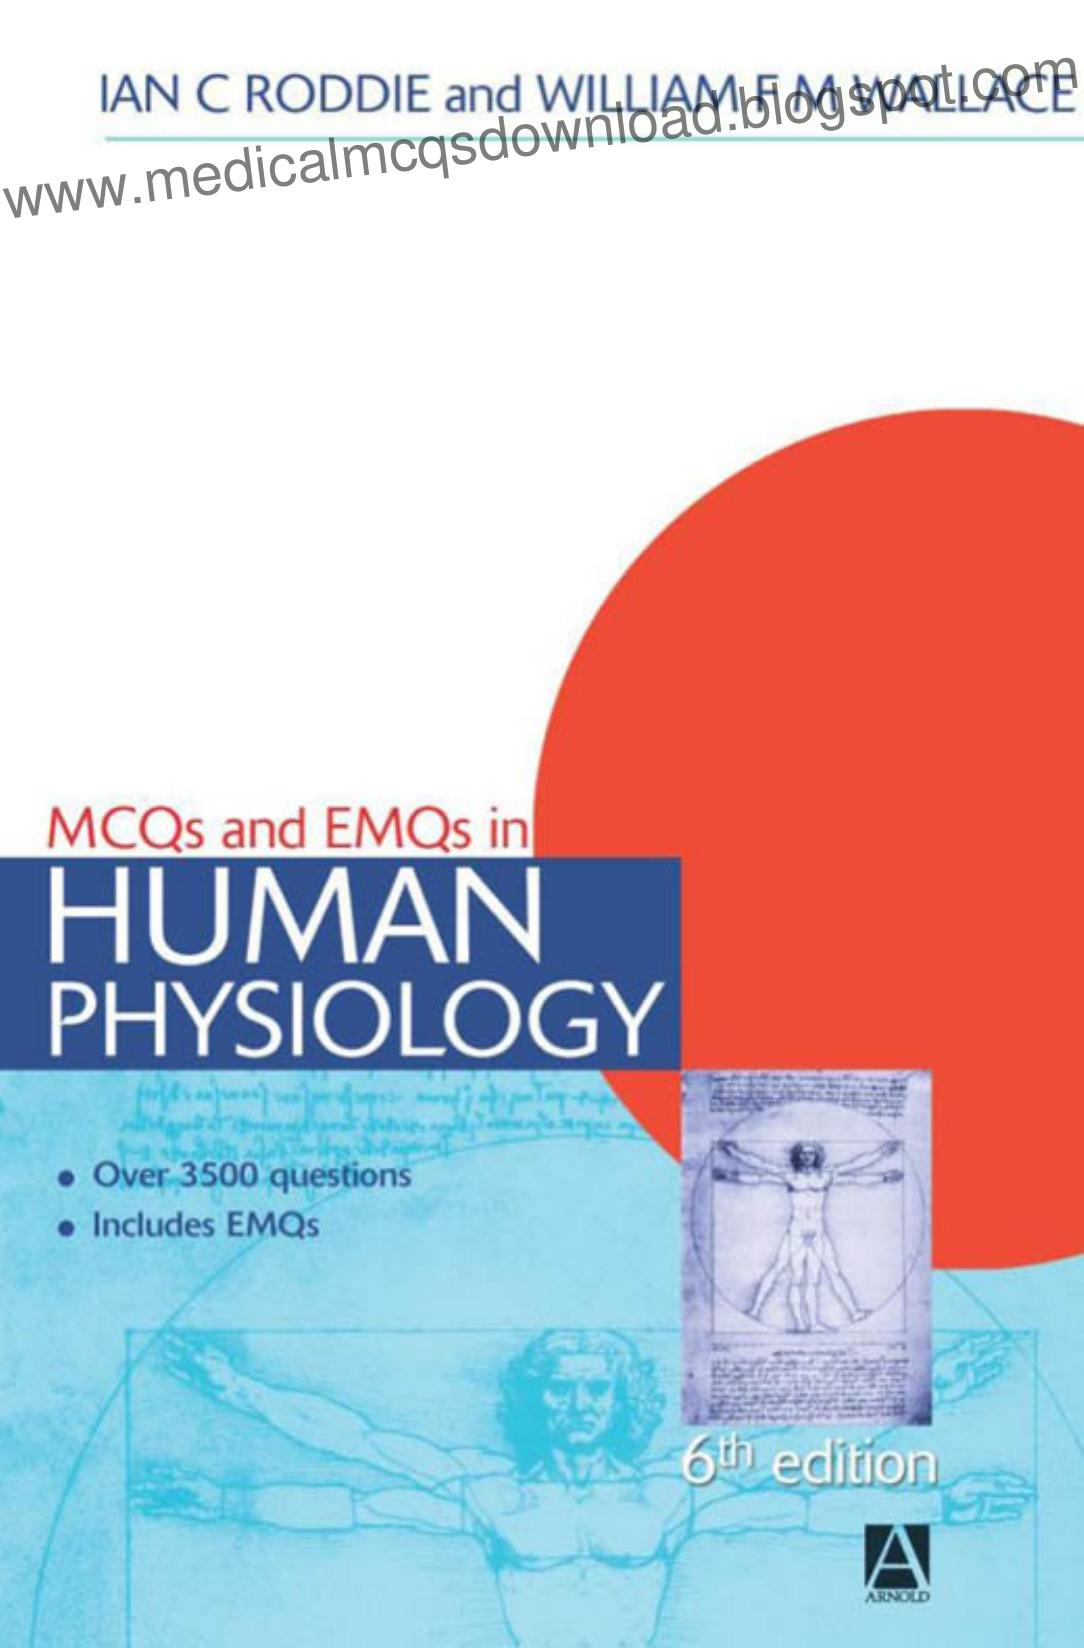 MCQs and EMQs in Human Physiology